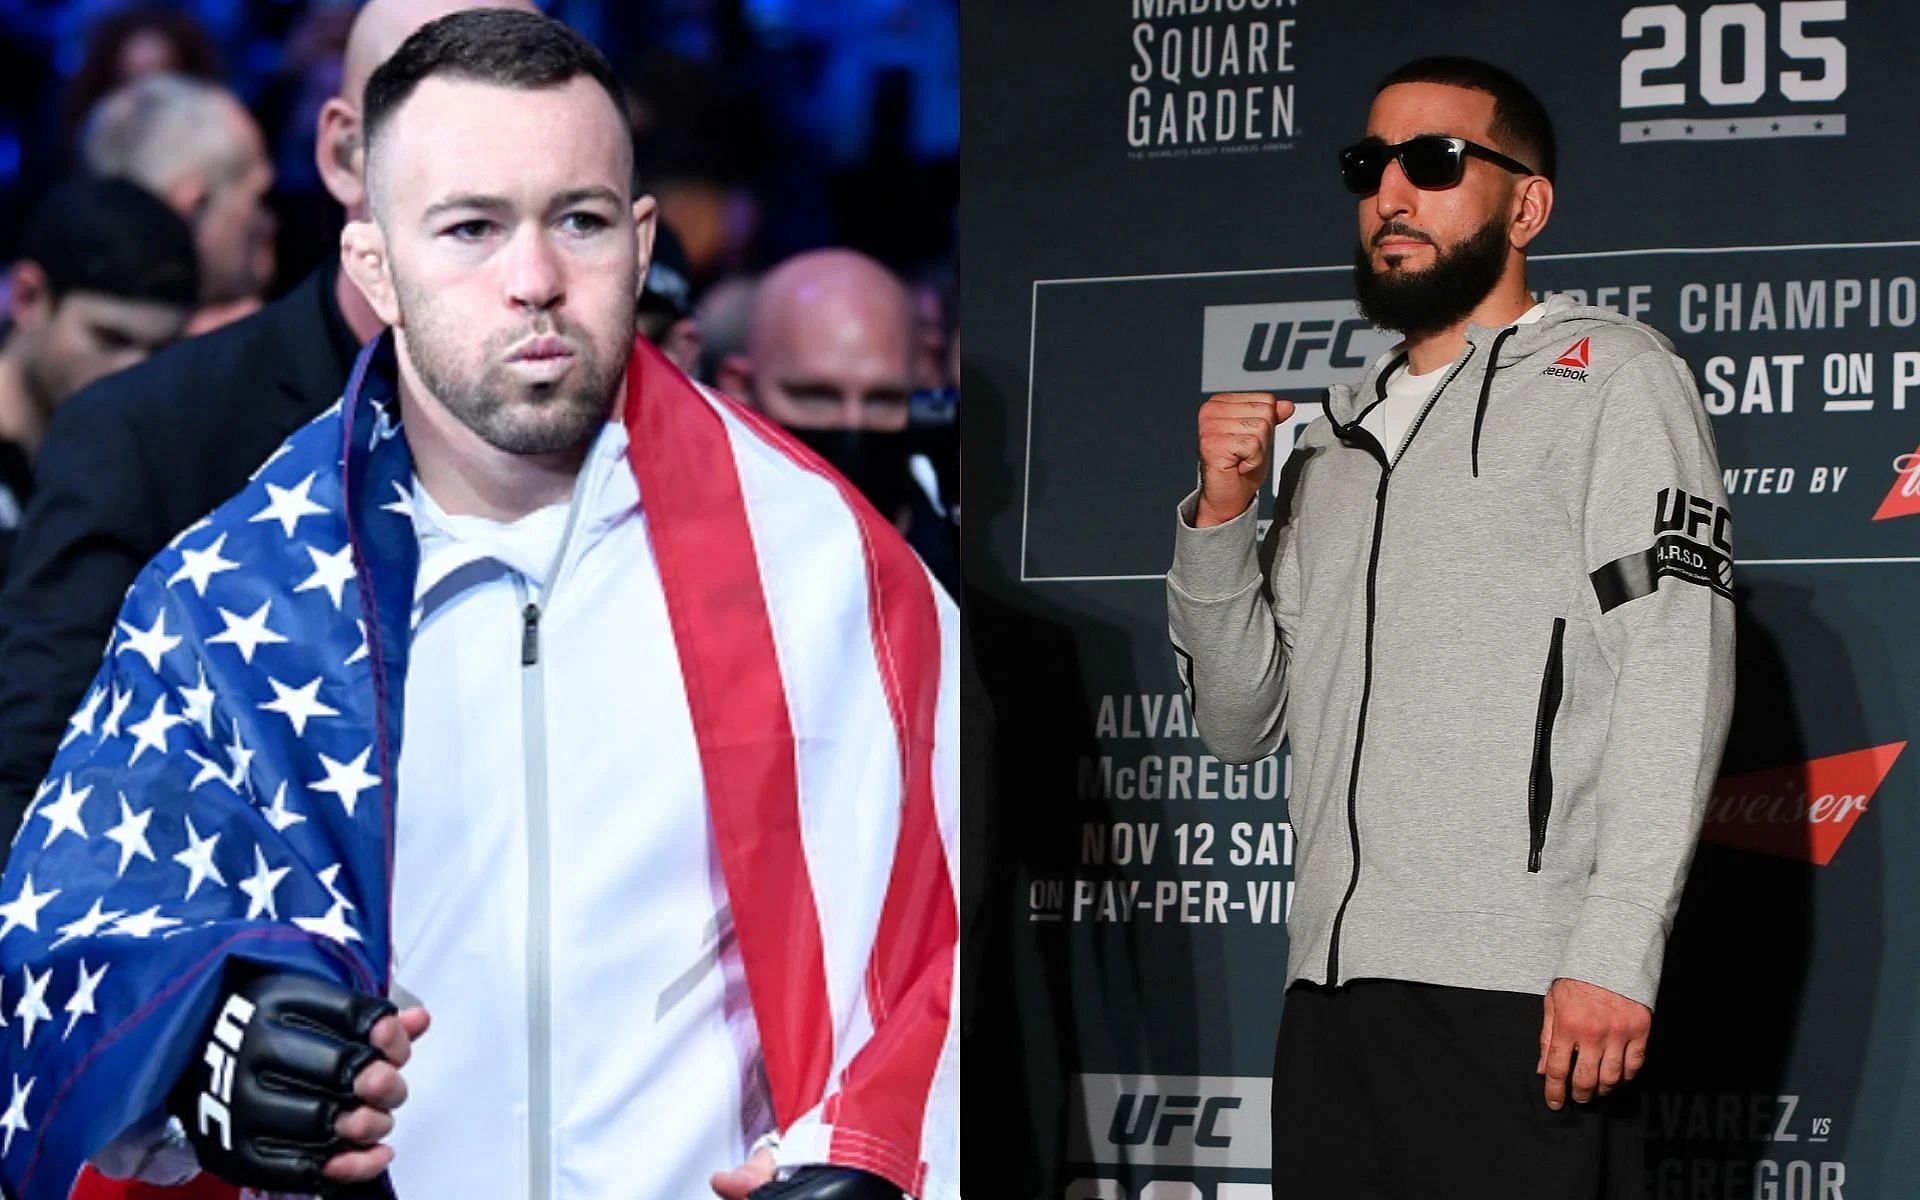 Colby Covington (left) and Belal Muhammad (right)